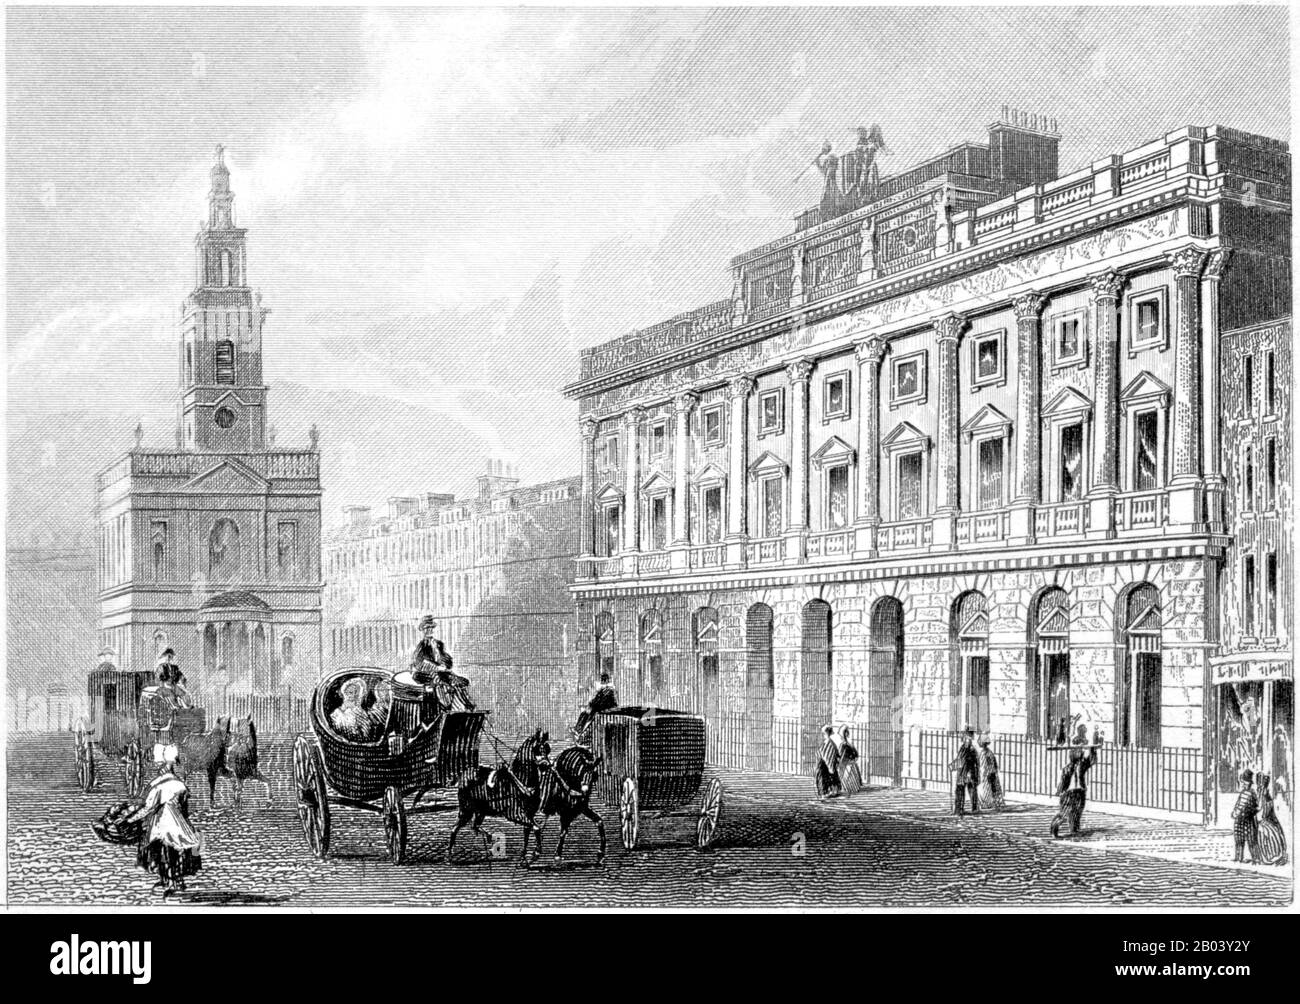 An engraving of the Somerset House, Strand, London scanned at high resolution from a book printed in 1851. Believed copyright free. Stock Photo